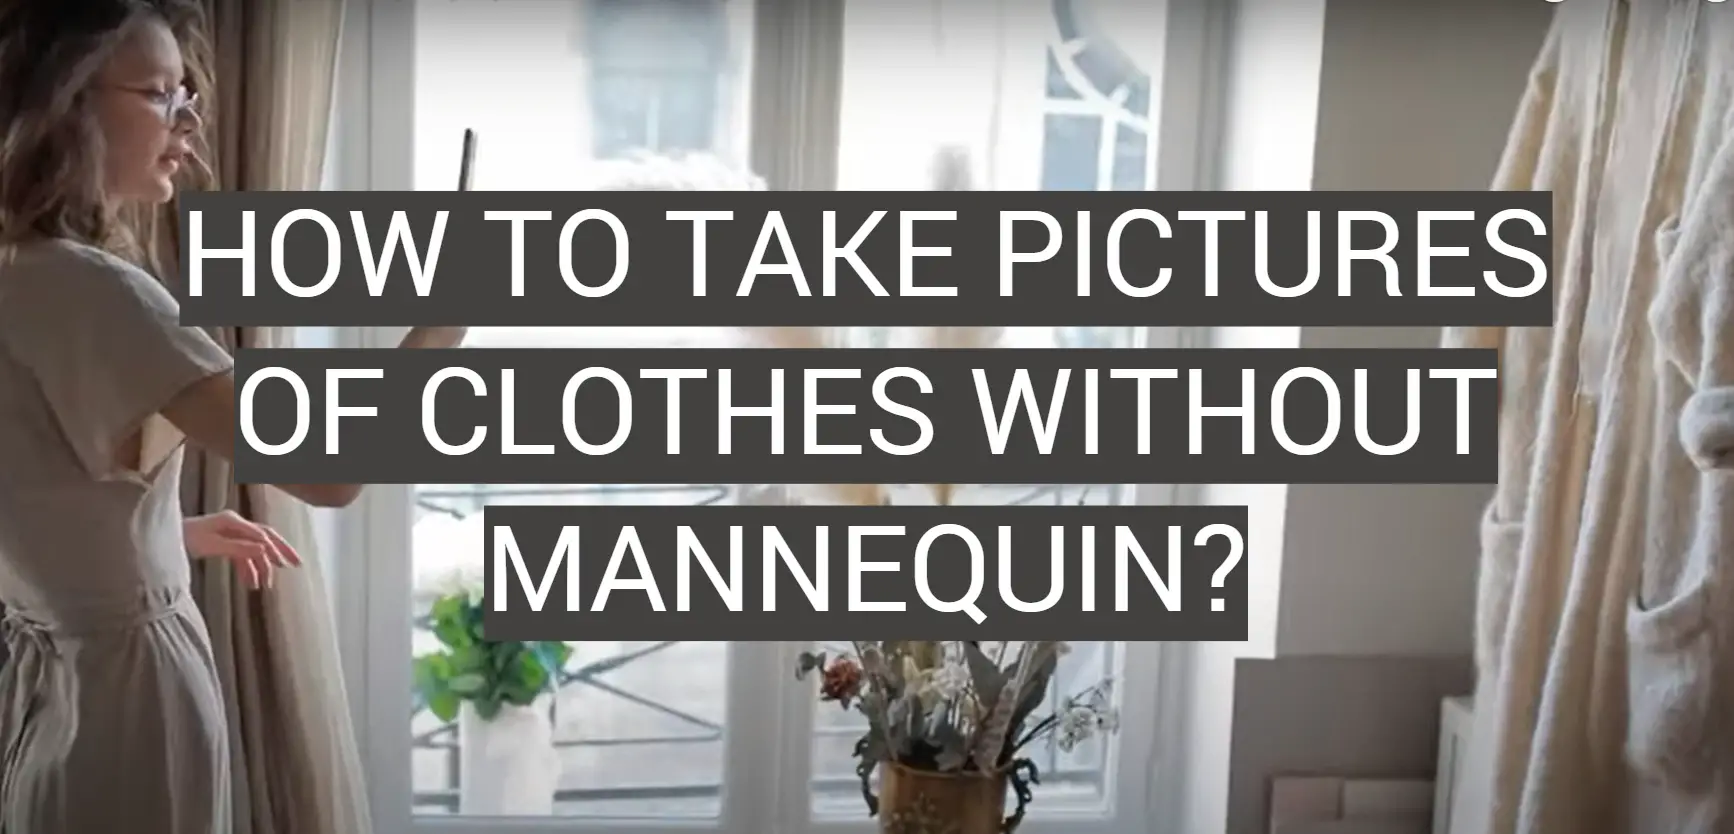 How to Take Pictures of Clothes Without Mannequin?